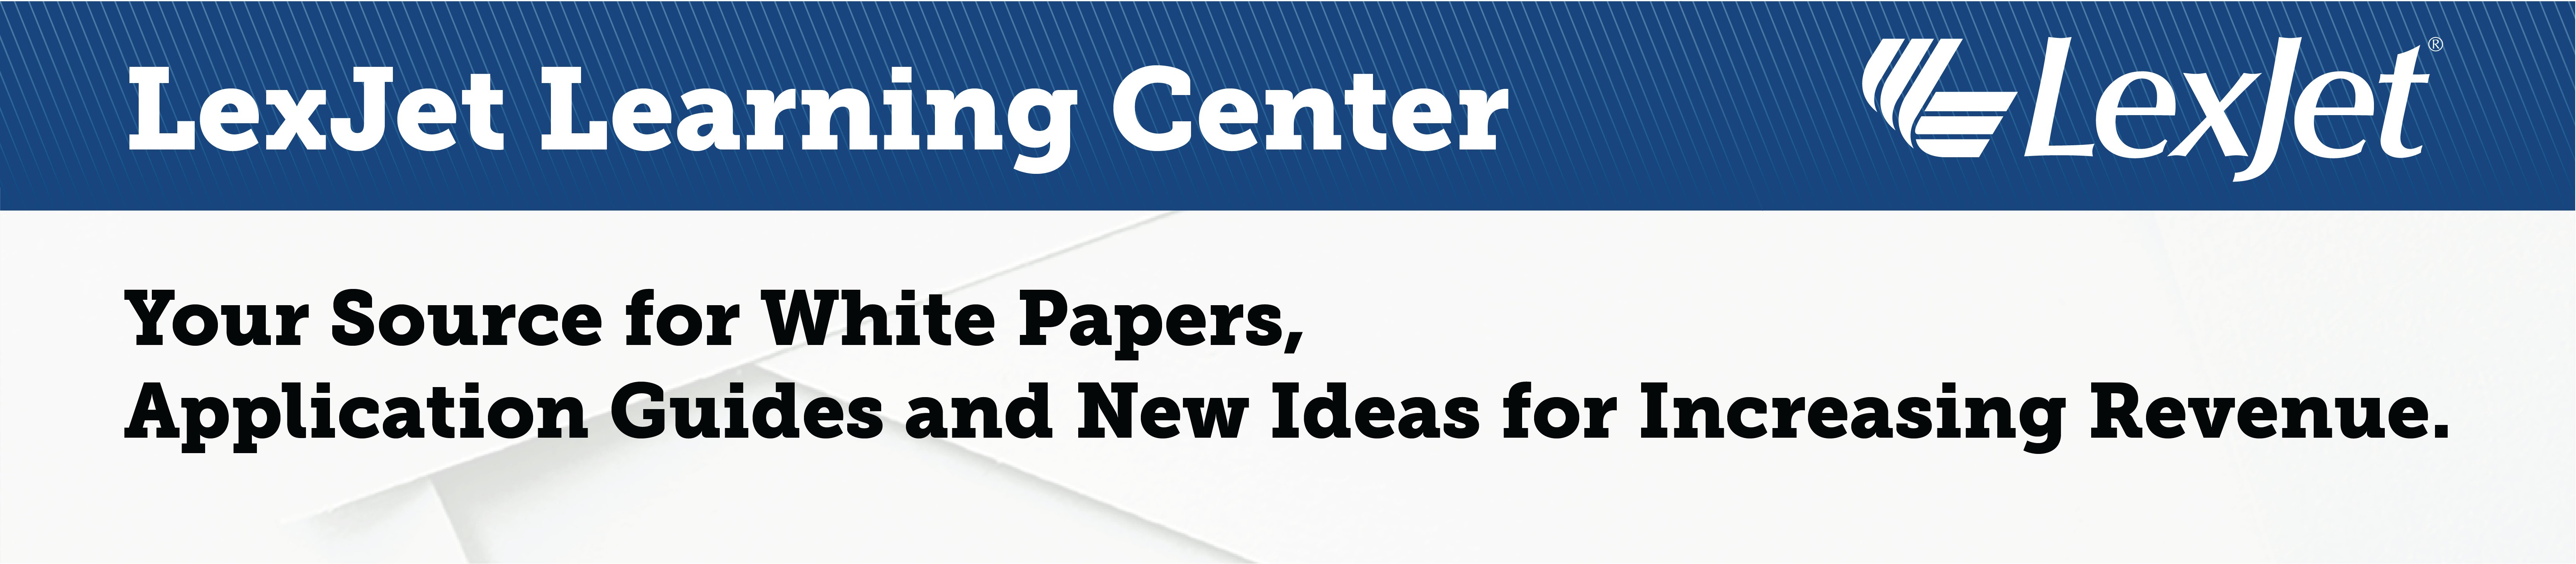 Learning Center Landing Page Header